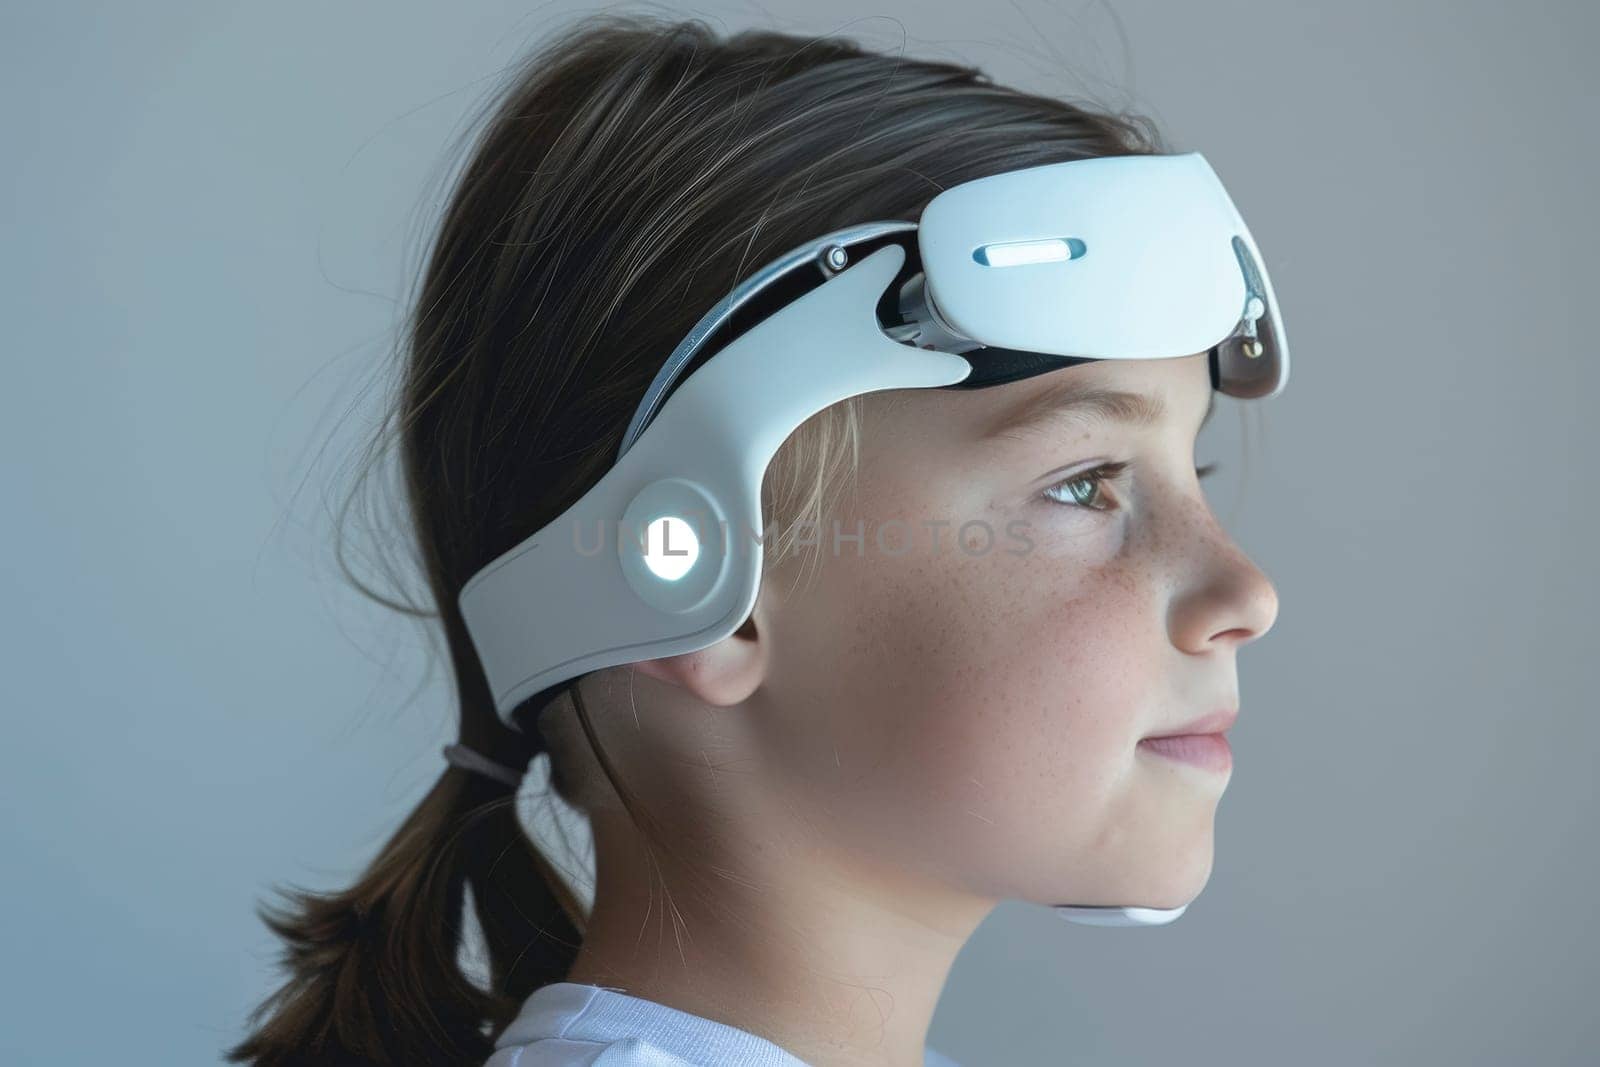 A young girl with a ponytail gazes thoughtfully, adorned with a futuristic white and black wearable headset equipped with illumination. This cutting-edge technology hints at the merging of play and learning in modern childhood